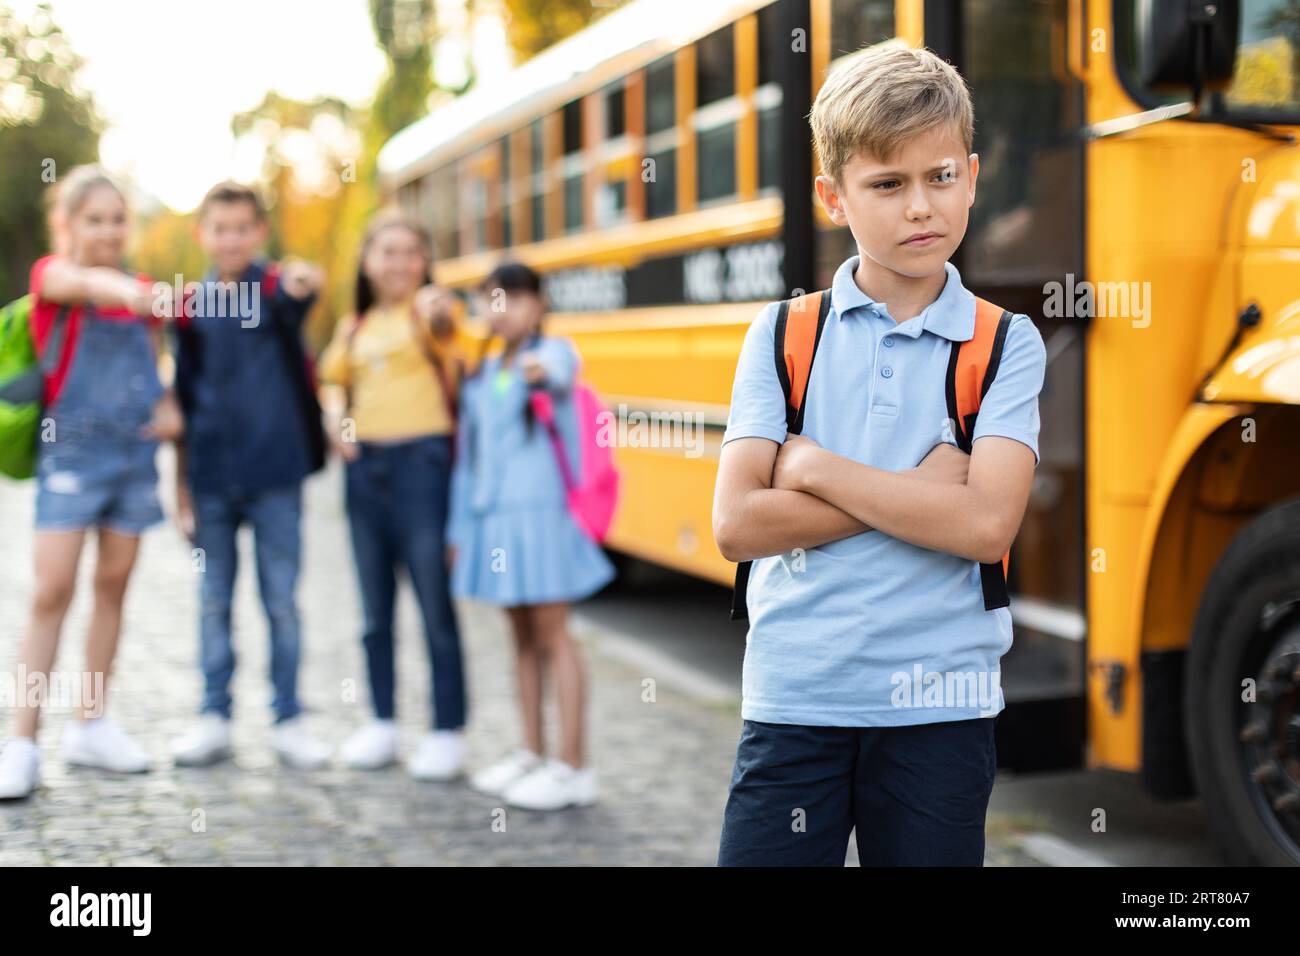 Schoolkids bullying their upset classmate while standing near school bus Stock Photo